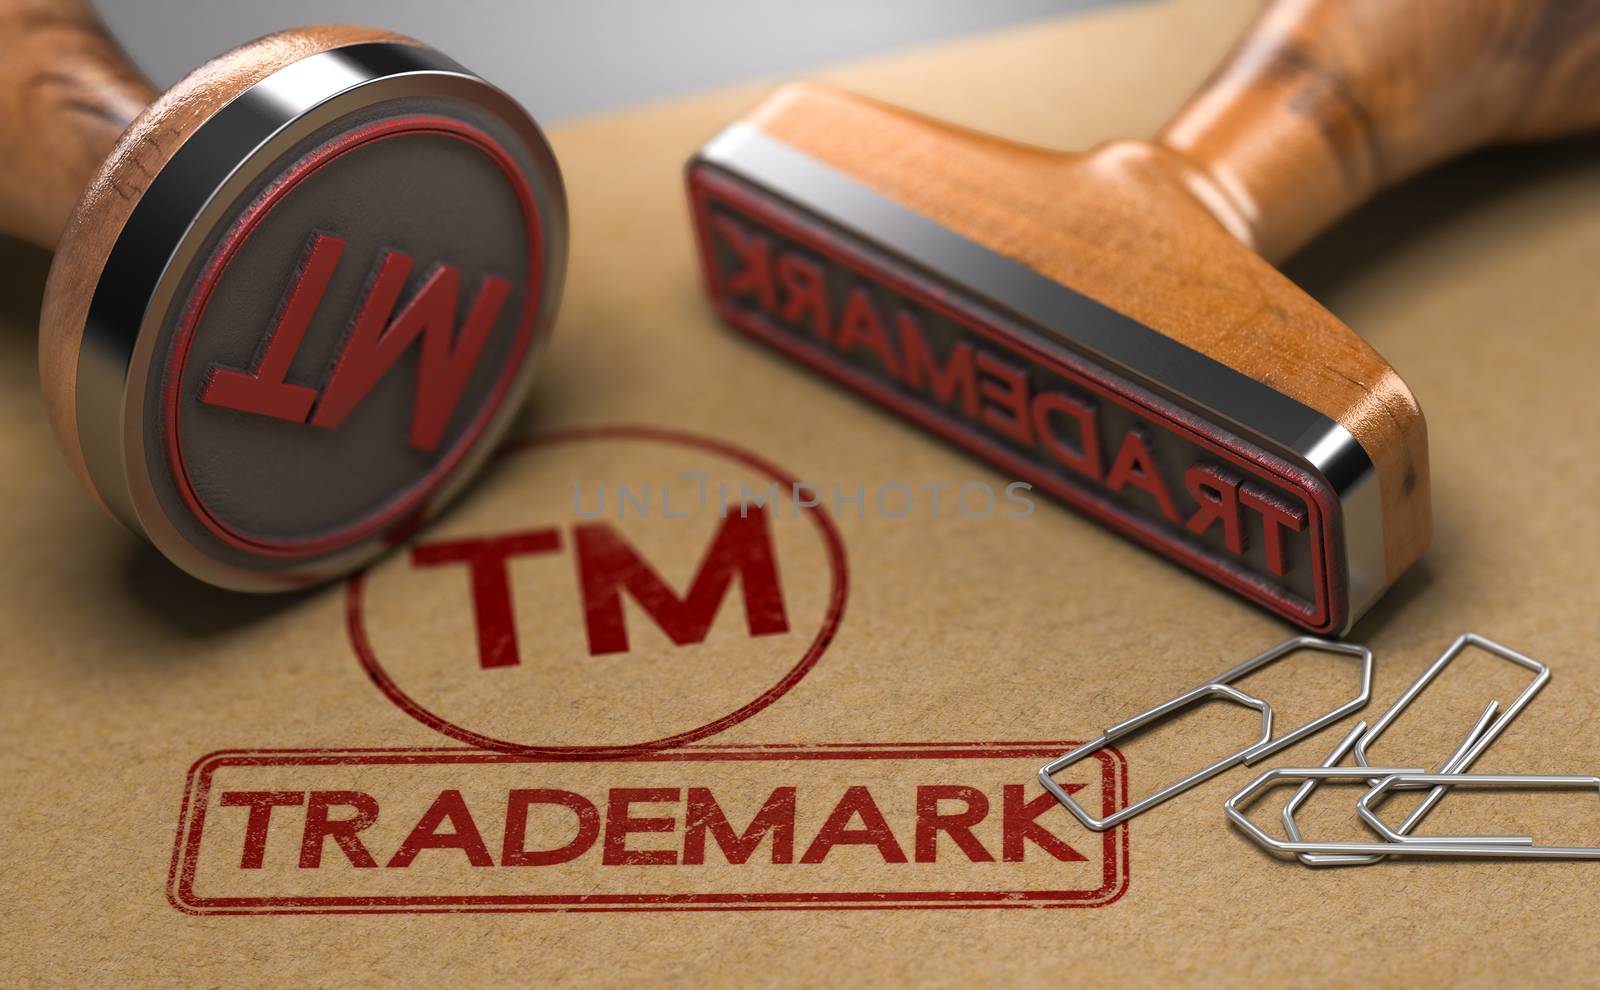 Trademark Registration Concept by Olivier-Le-Moal